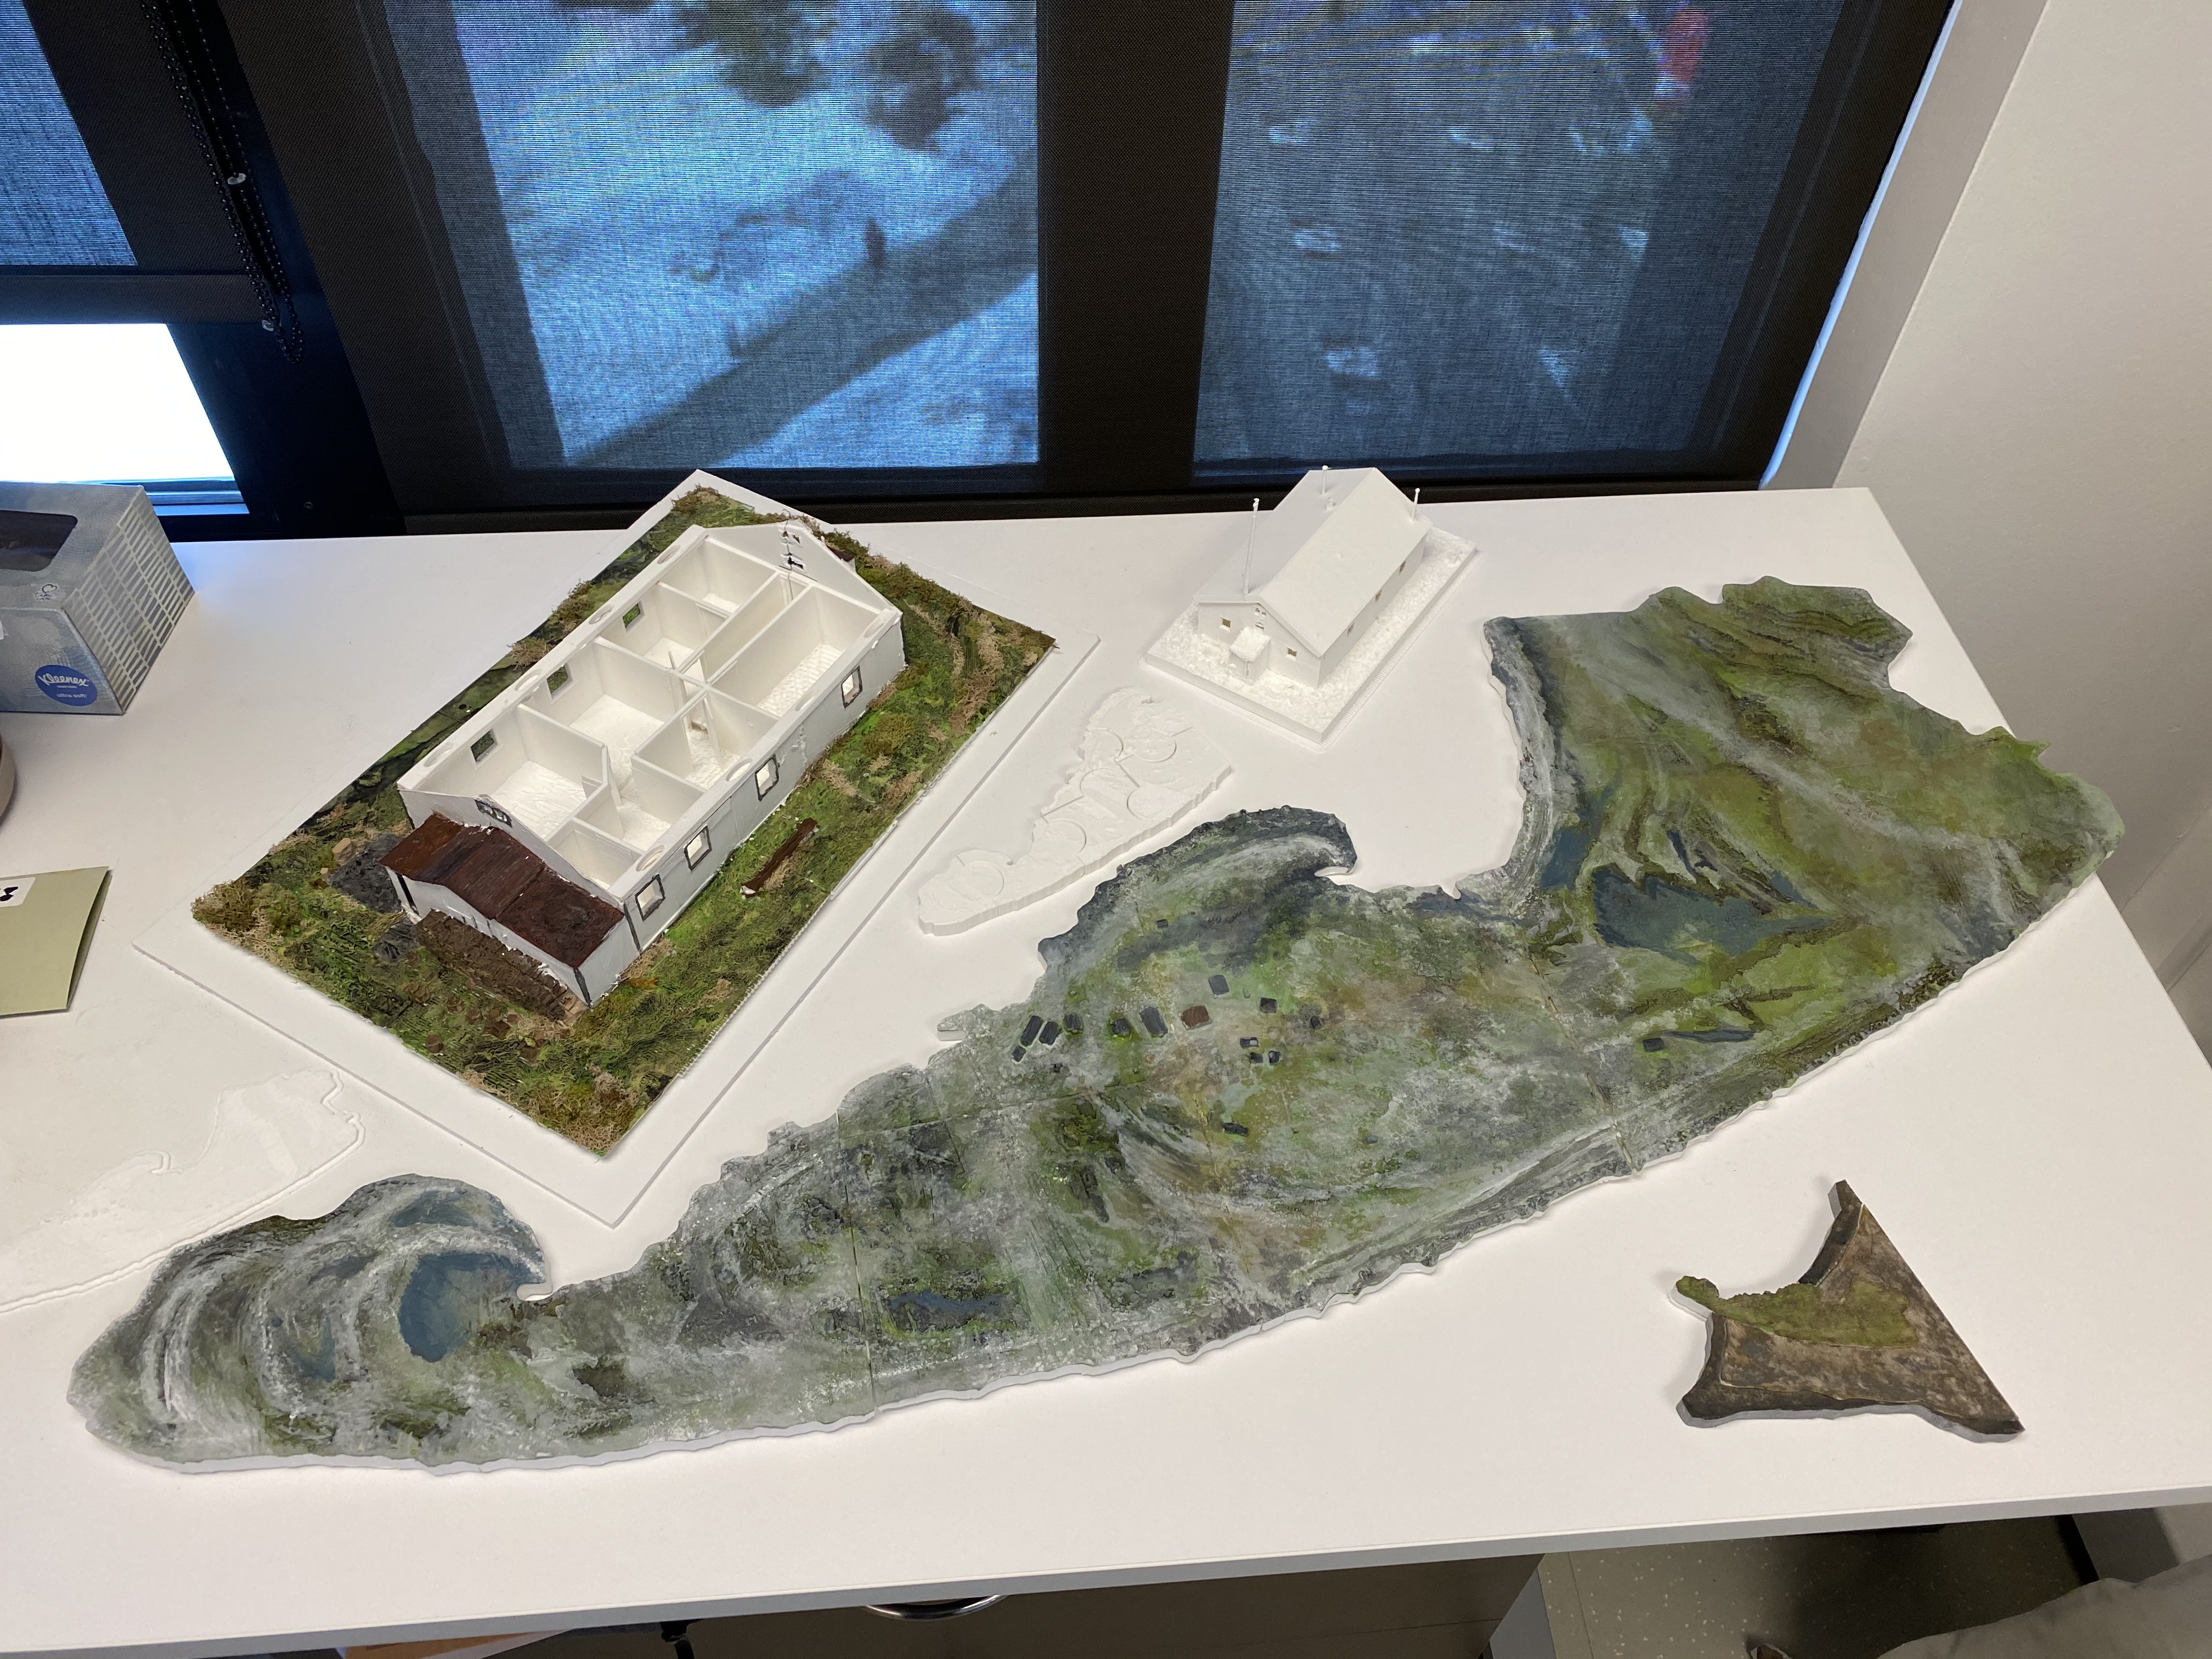 Assorted 3D printed models of the Community House and Pauline Cove, created from TLS and Drone data